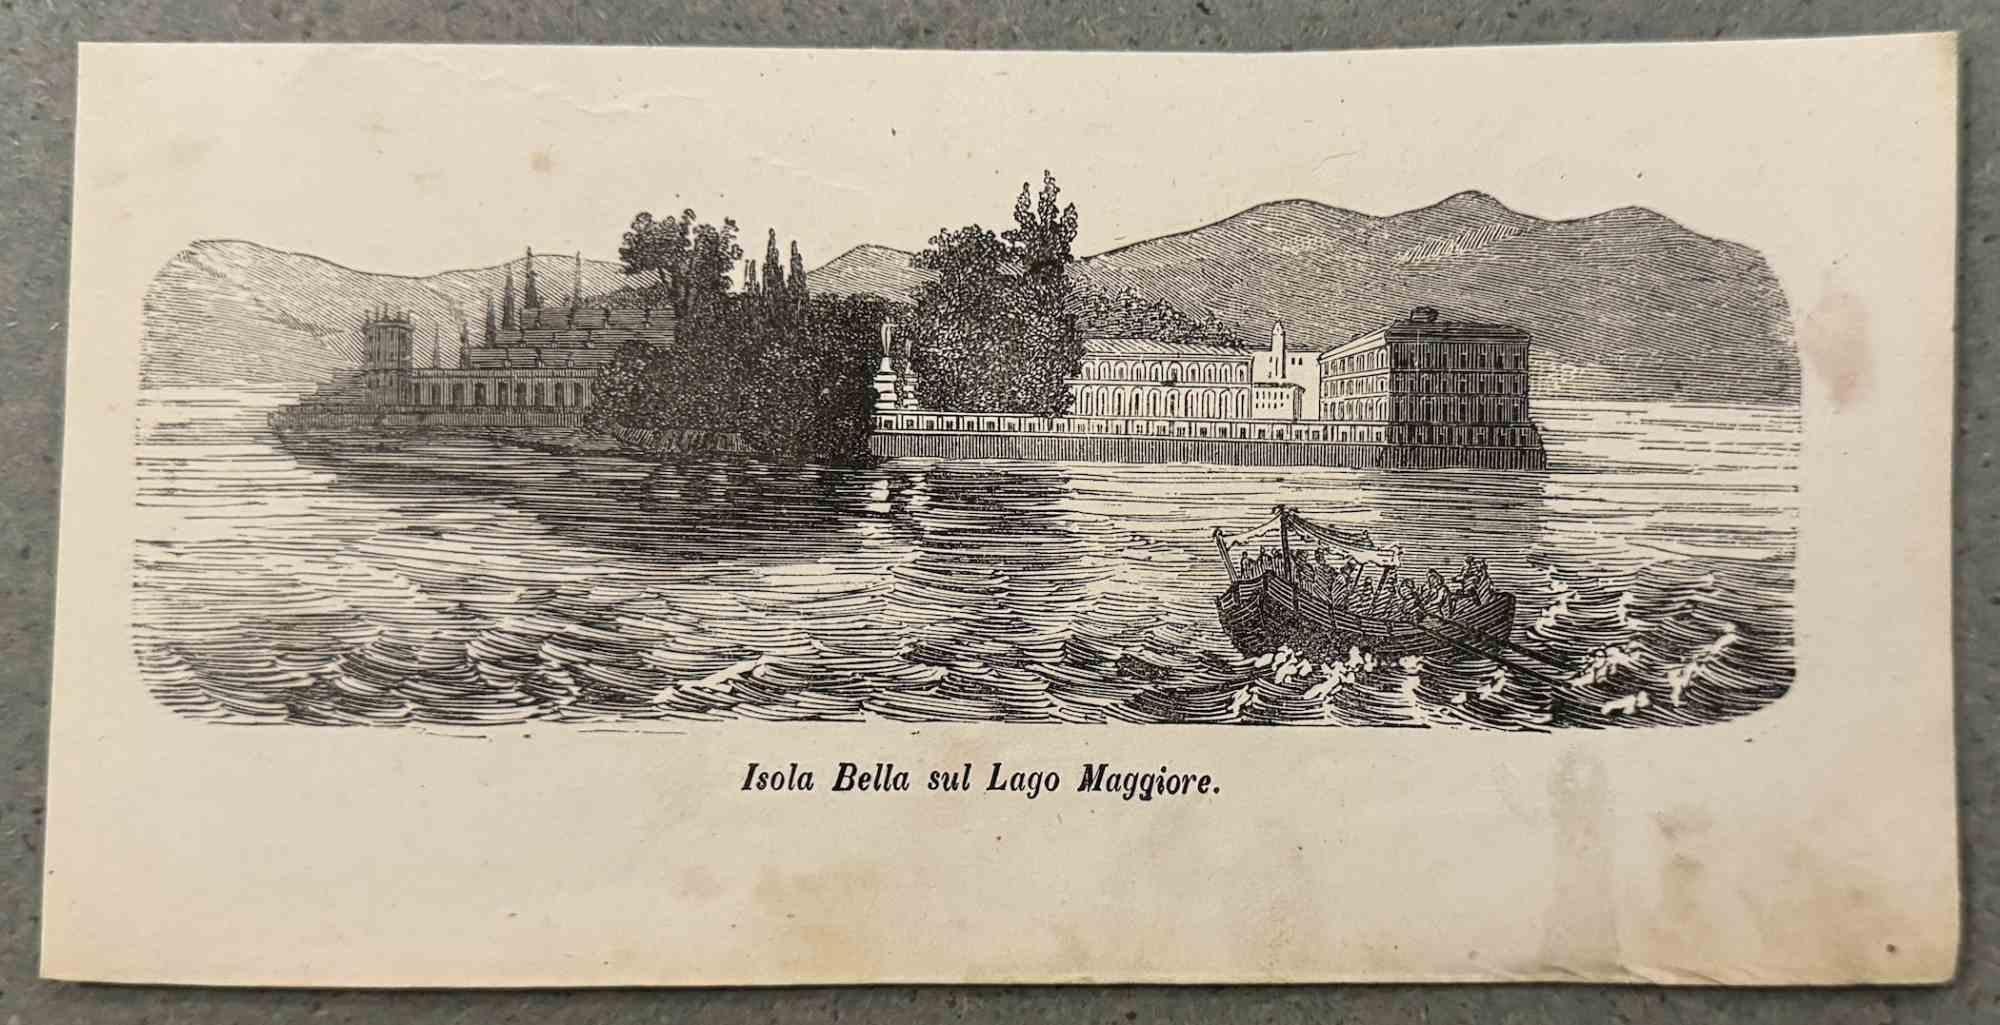 Various Artists Landscape Print - Isola Bella on Lake Maggiore - Lithograph - 19th Century 